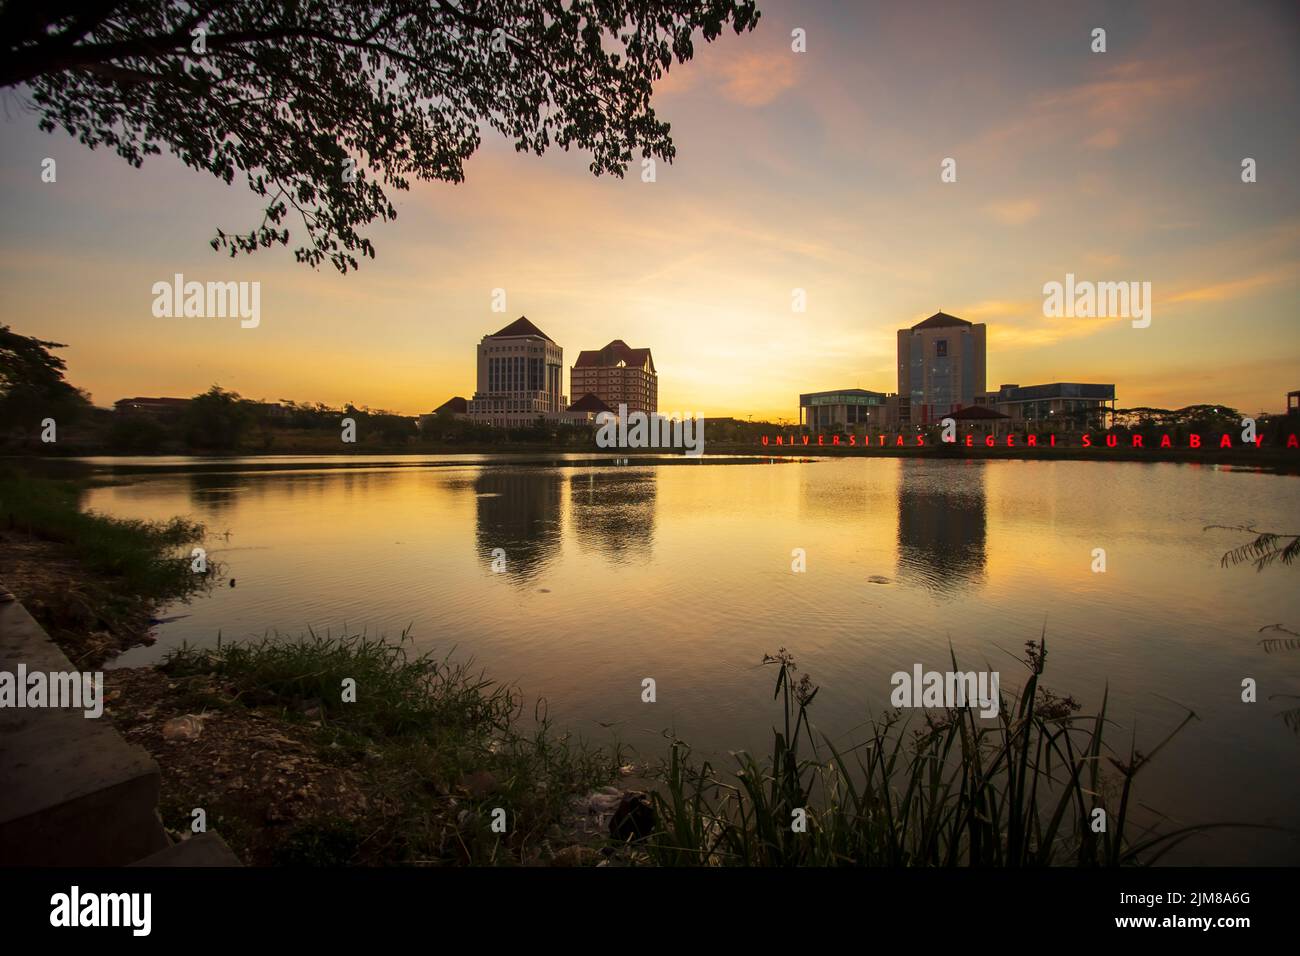 Unesa lake with reflections of buildings, Indonesia Stock Photo